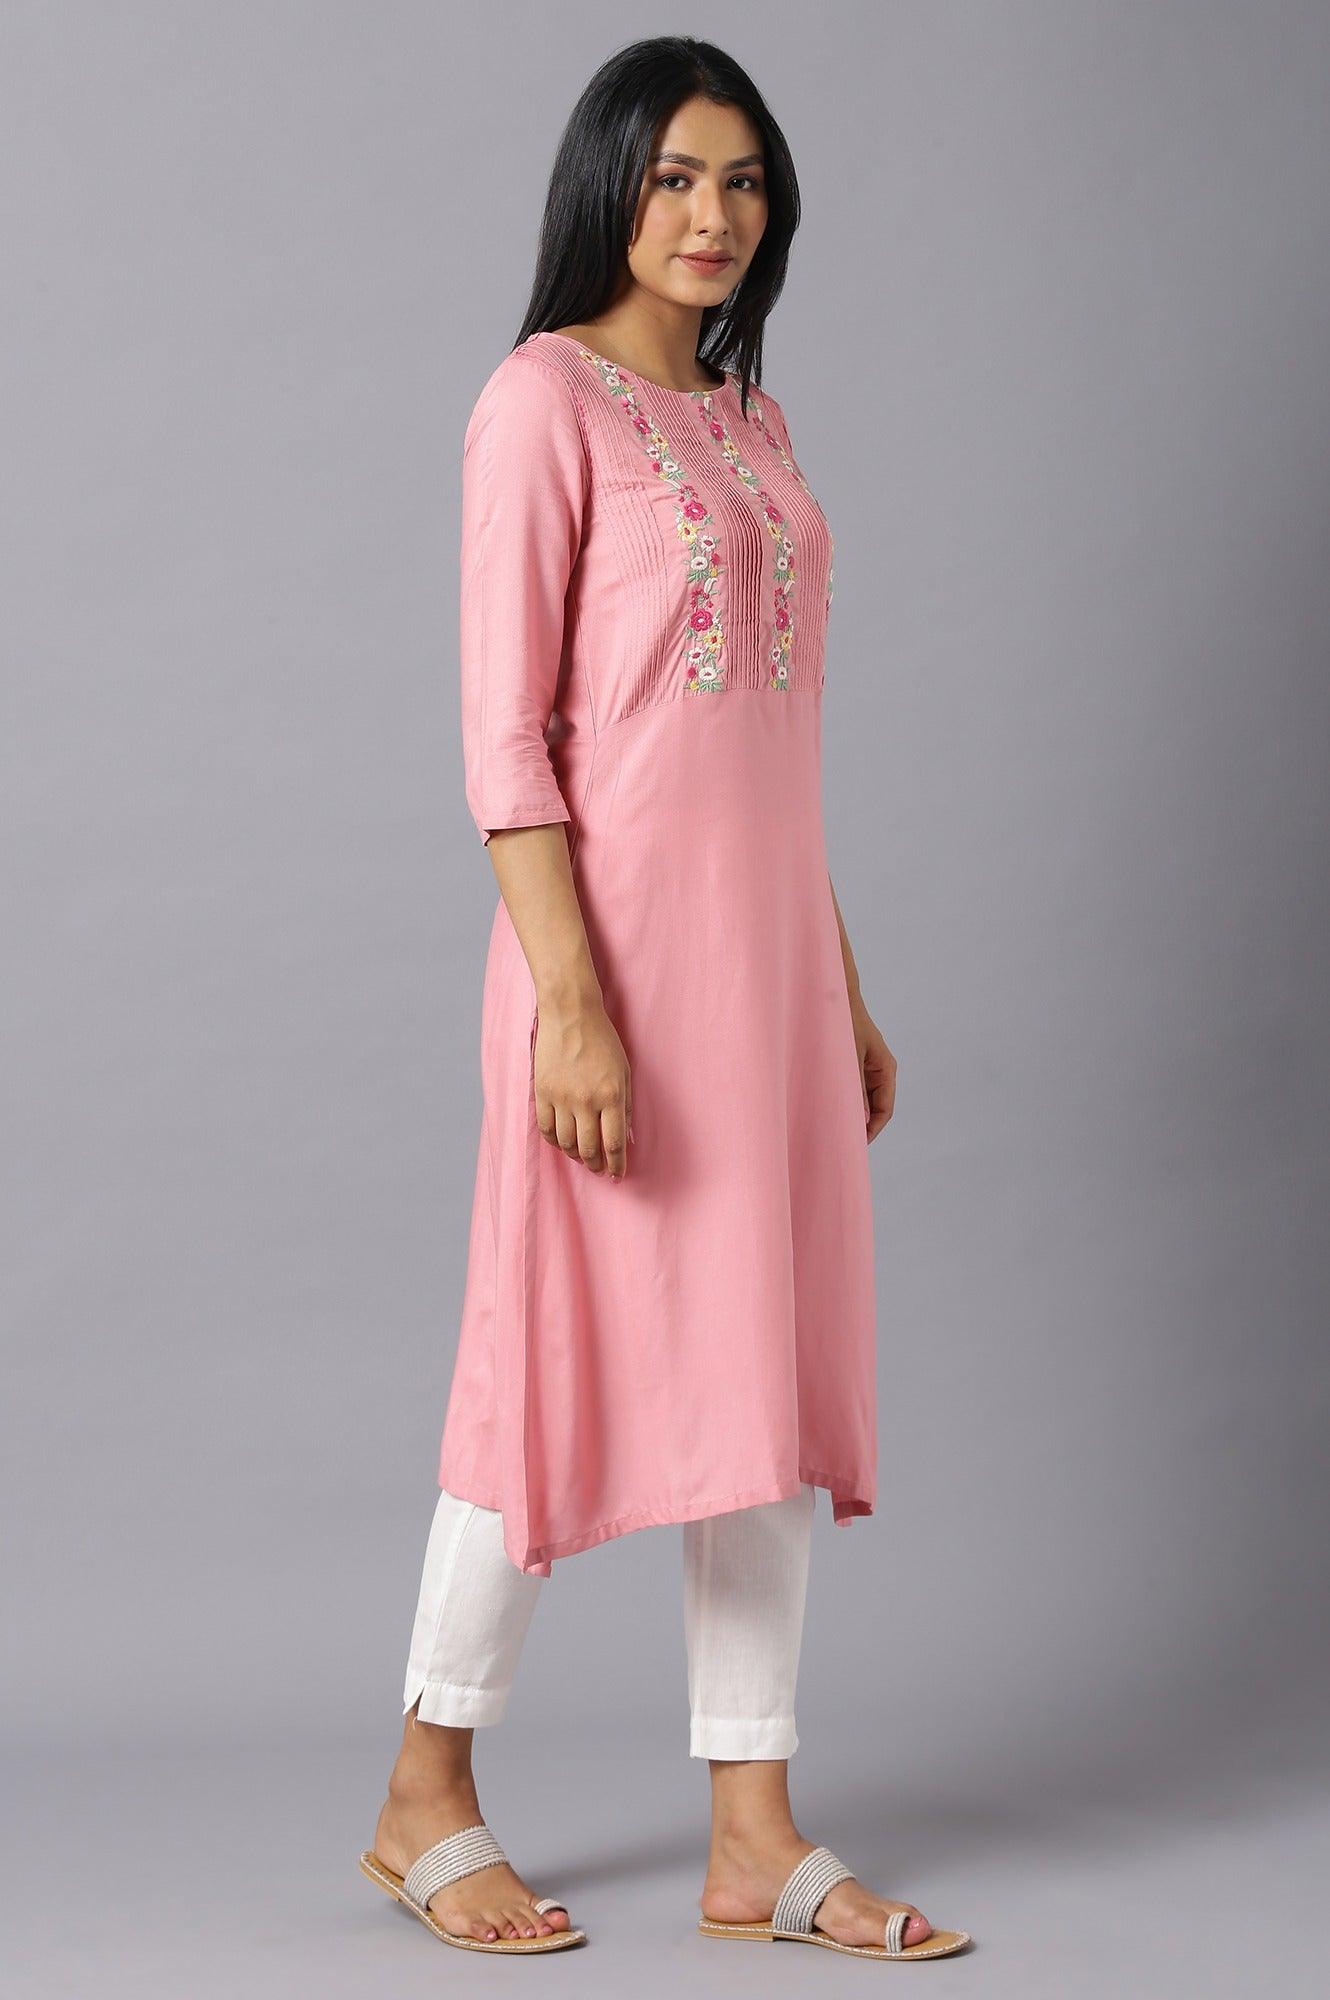 Pink Embroidered kurta With Lace Trimming - wforwoman